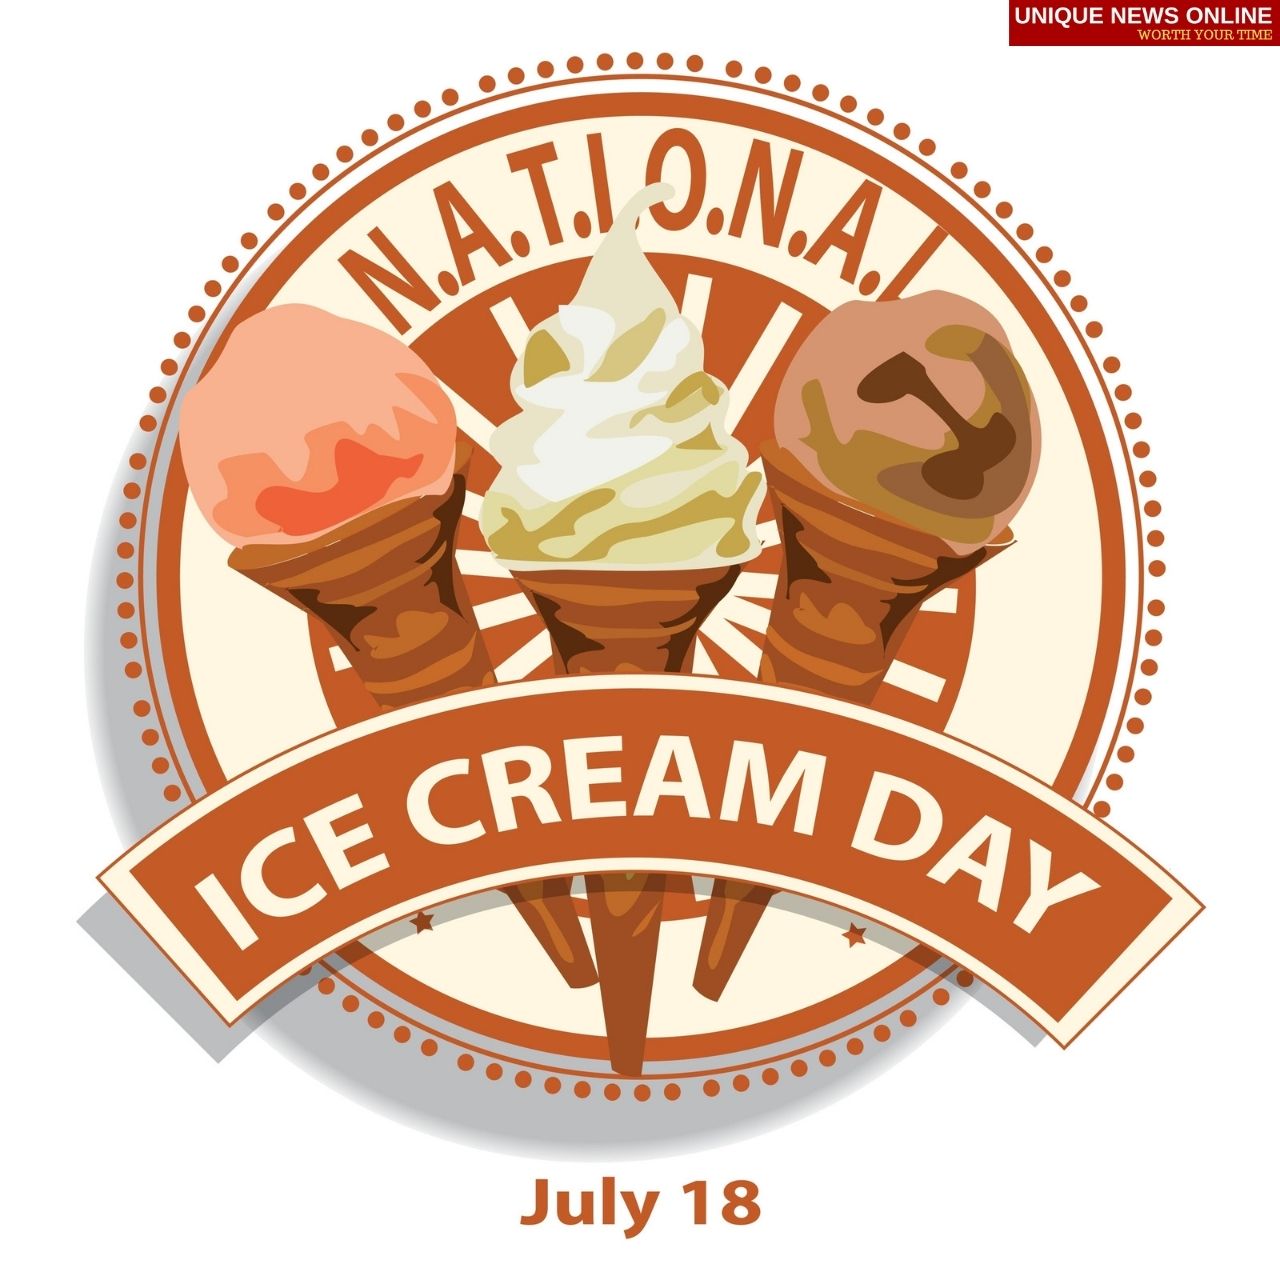 National Ice Cream Day (US) 2021: Quotes, Wishes, Images, and Poster to share